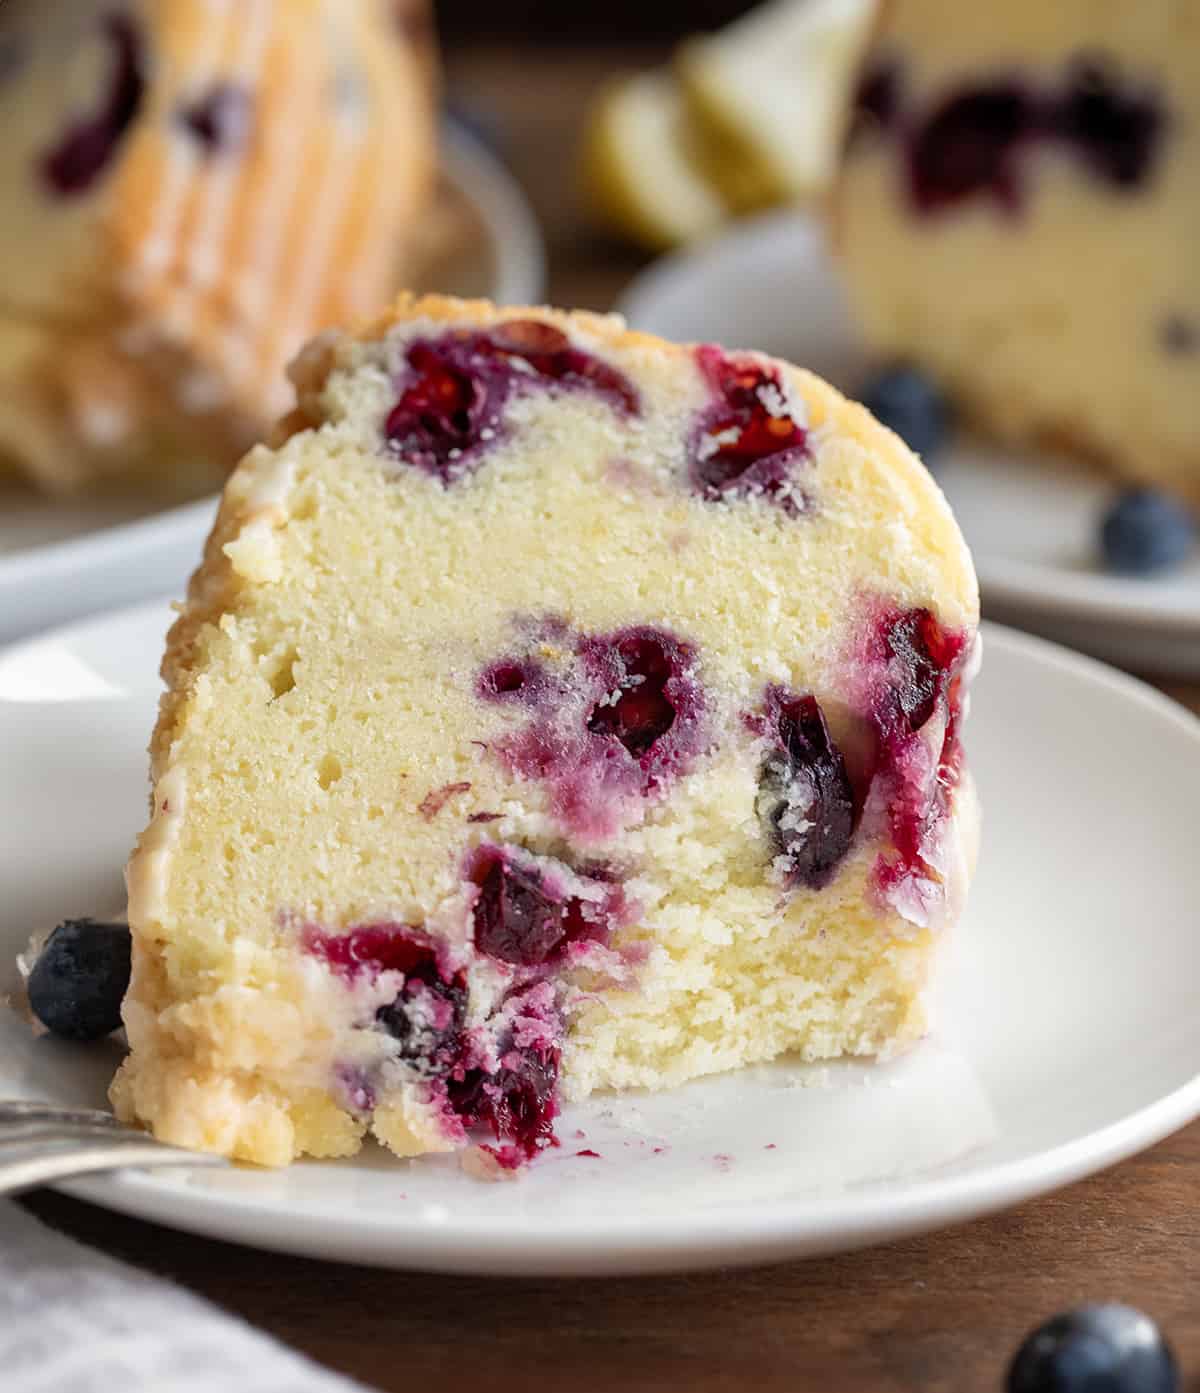 Piece of Lemon Blueberry Pound Cake on its side with a bite removed showing inside texture of cake.